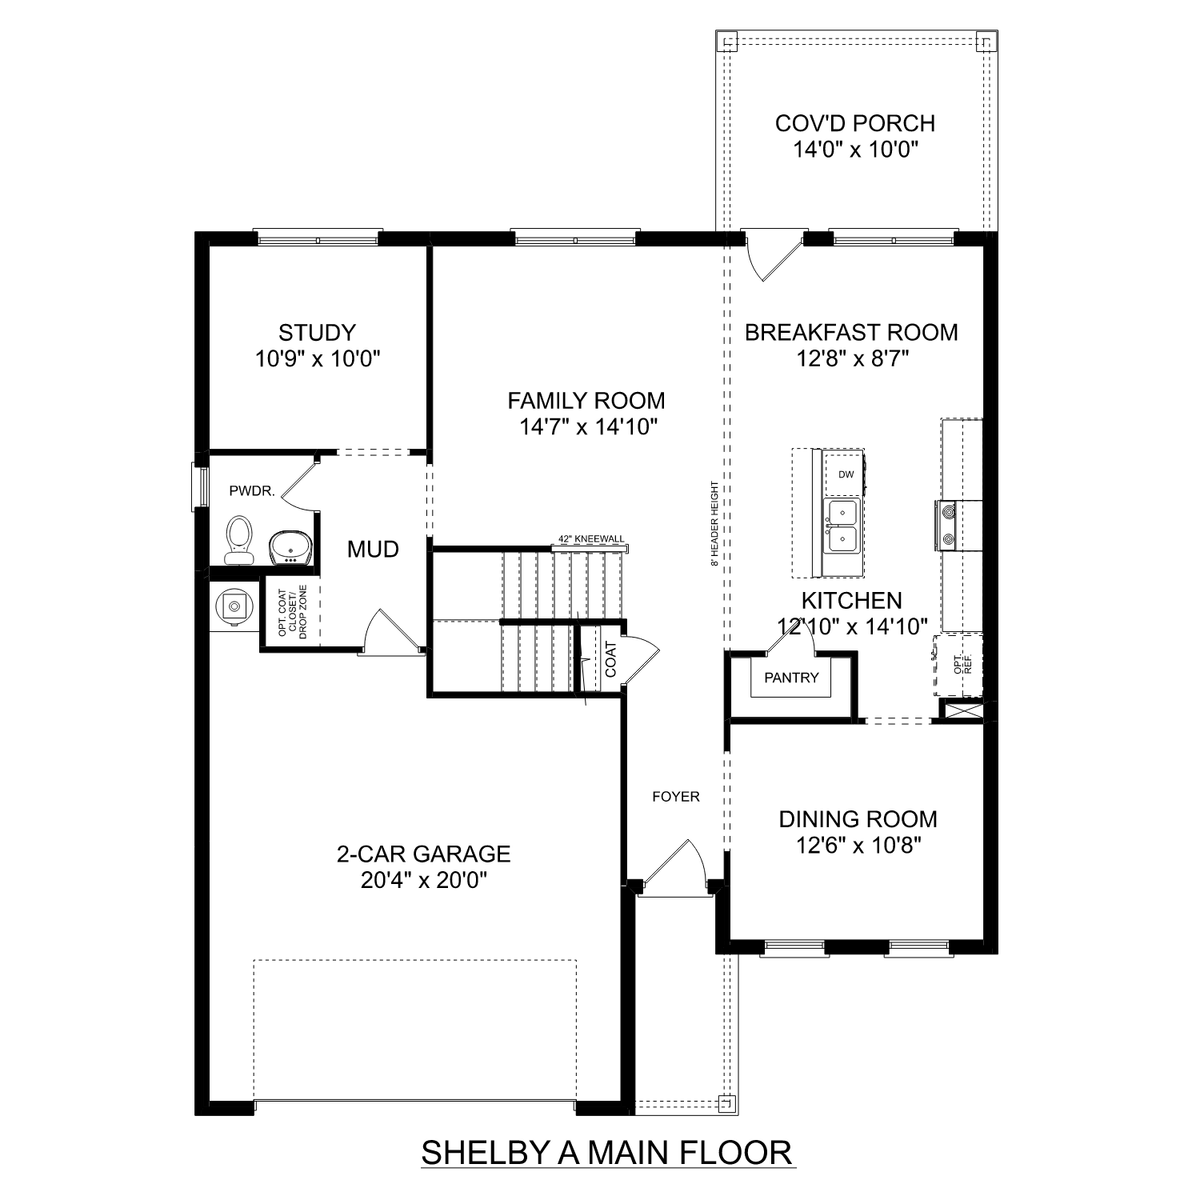 1 - The Shelby A floor plan layout for 14452 Harvest Ridge Lane in Davidson Homes' The Meadows community.